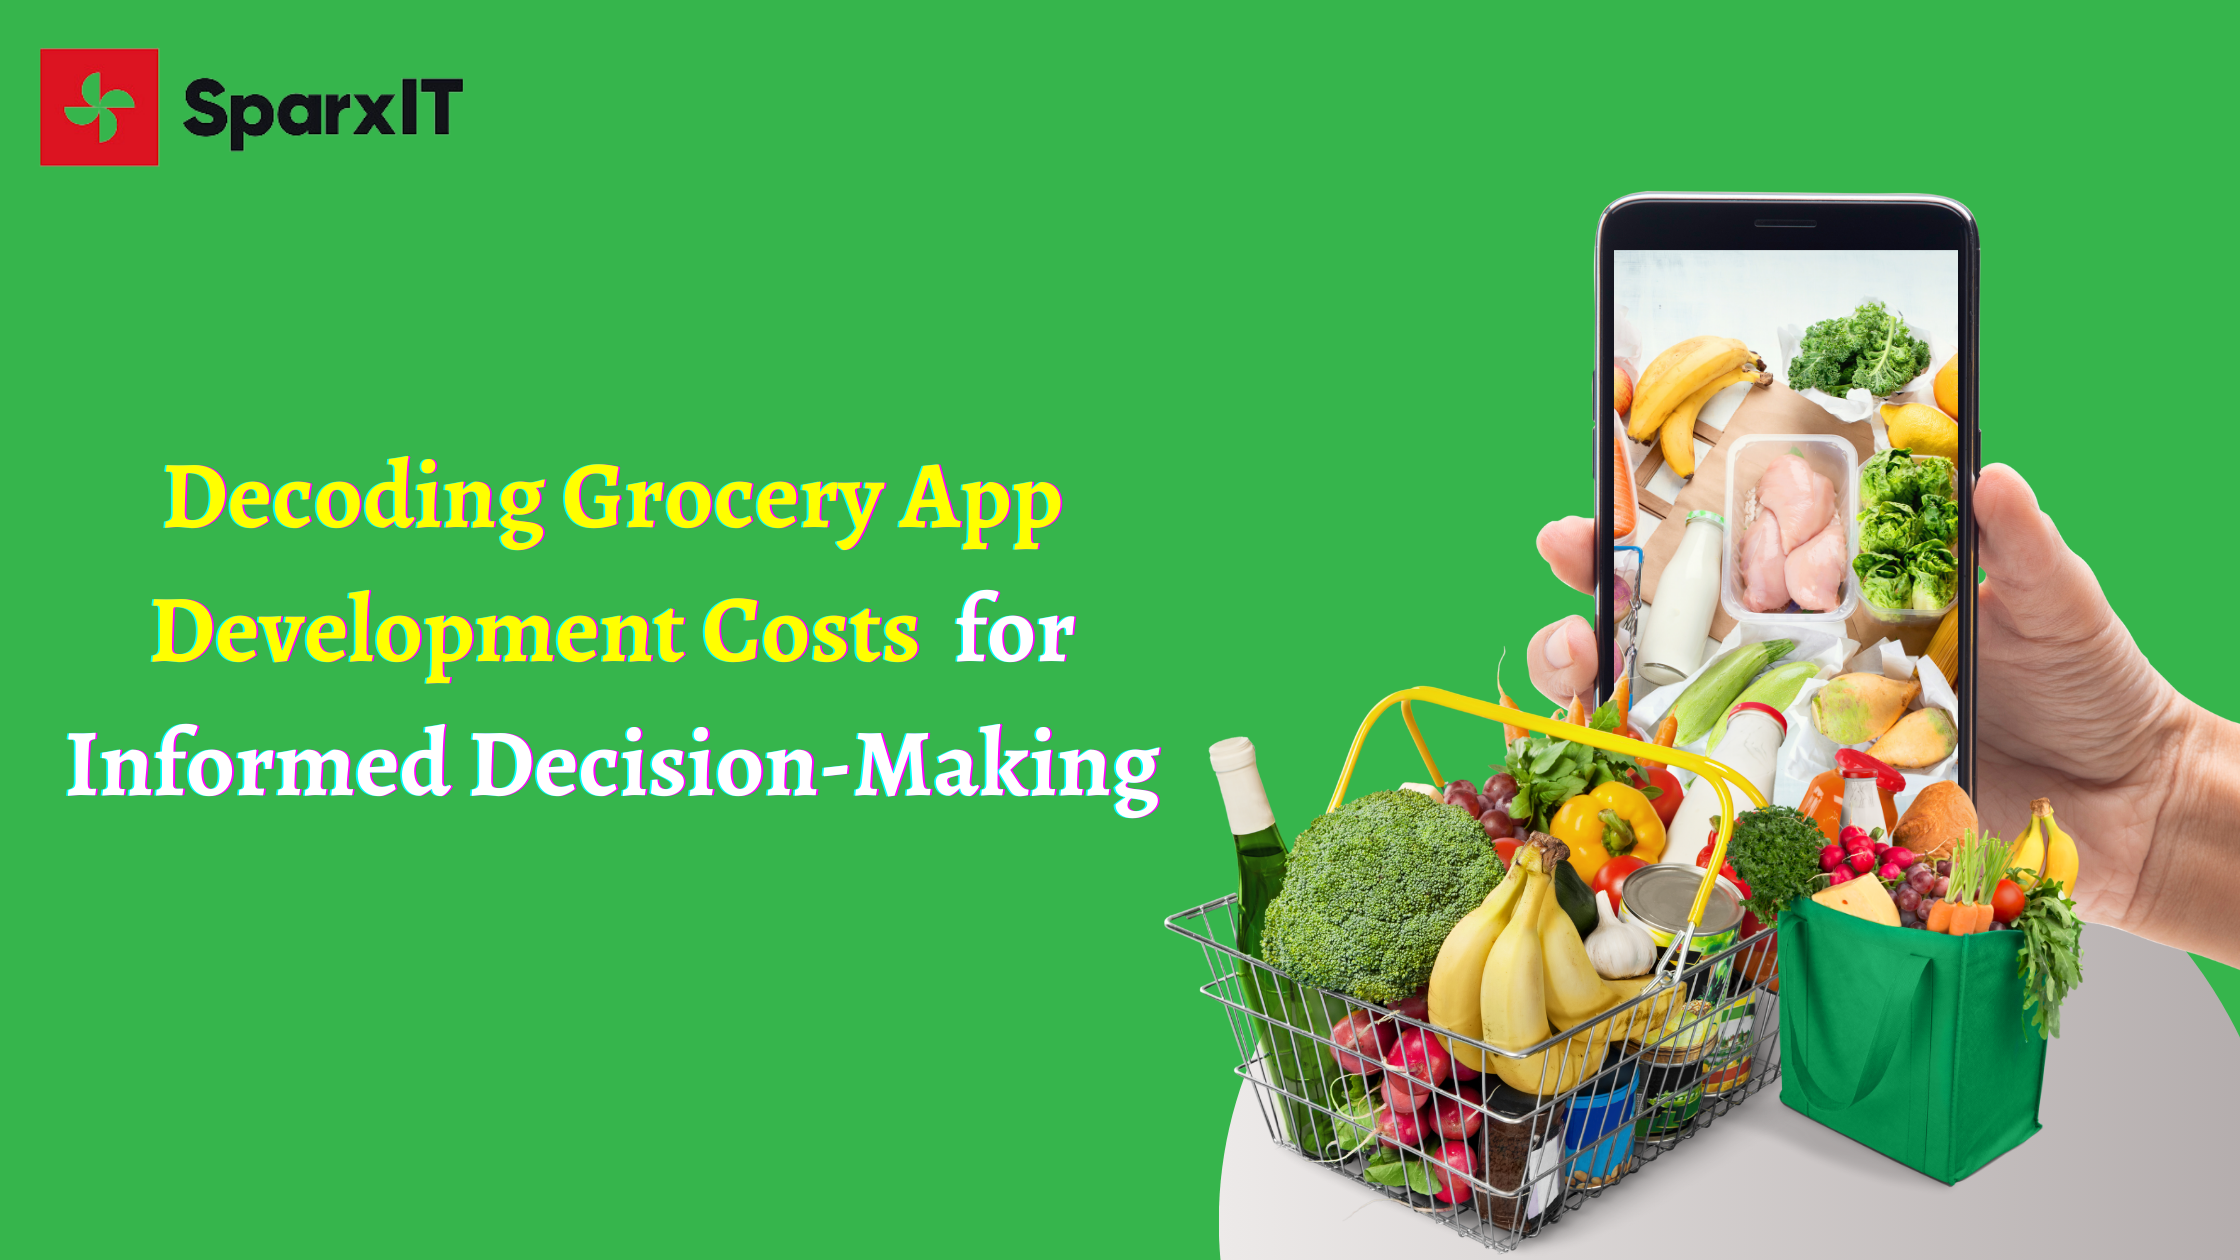 Decoding Grocery App Development Costs for Informed Decision-Making